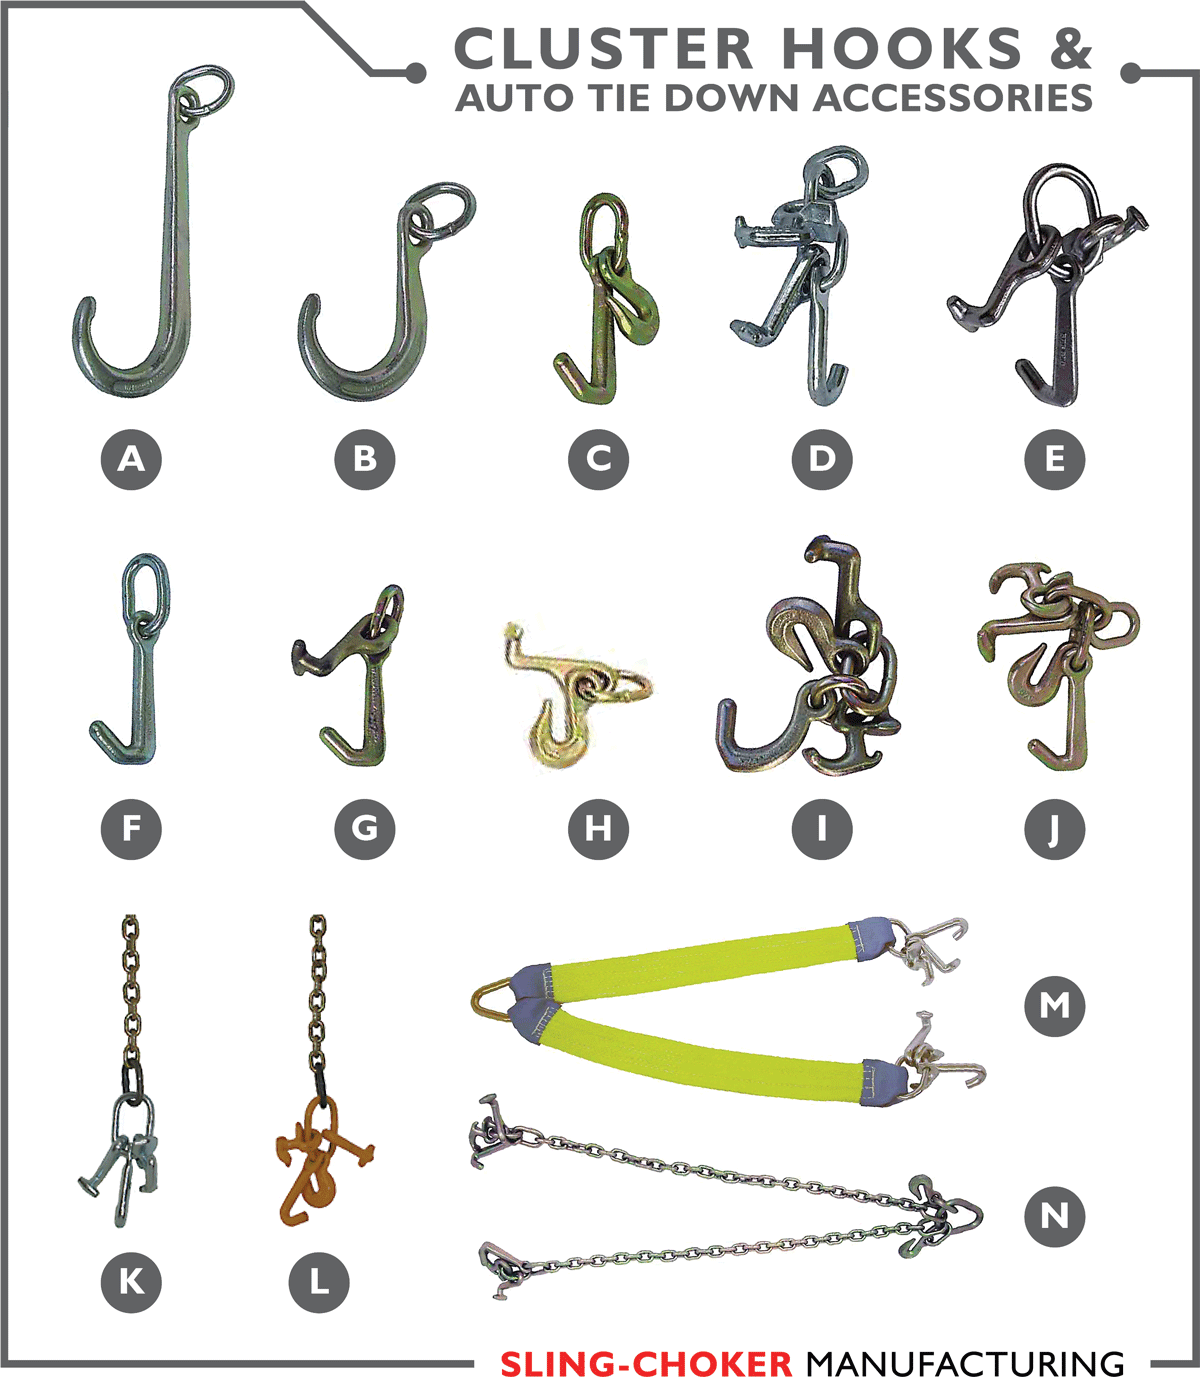 Cluster Hooks and Auto Tie Down Accessories